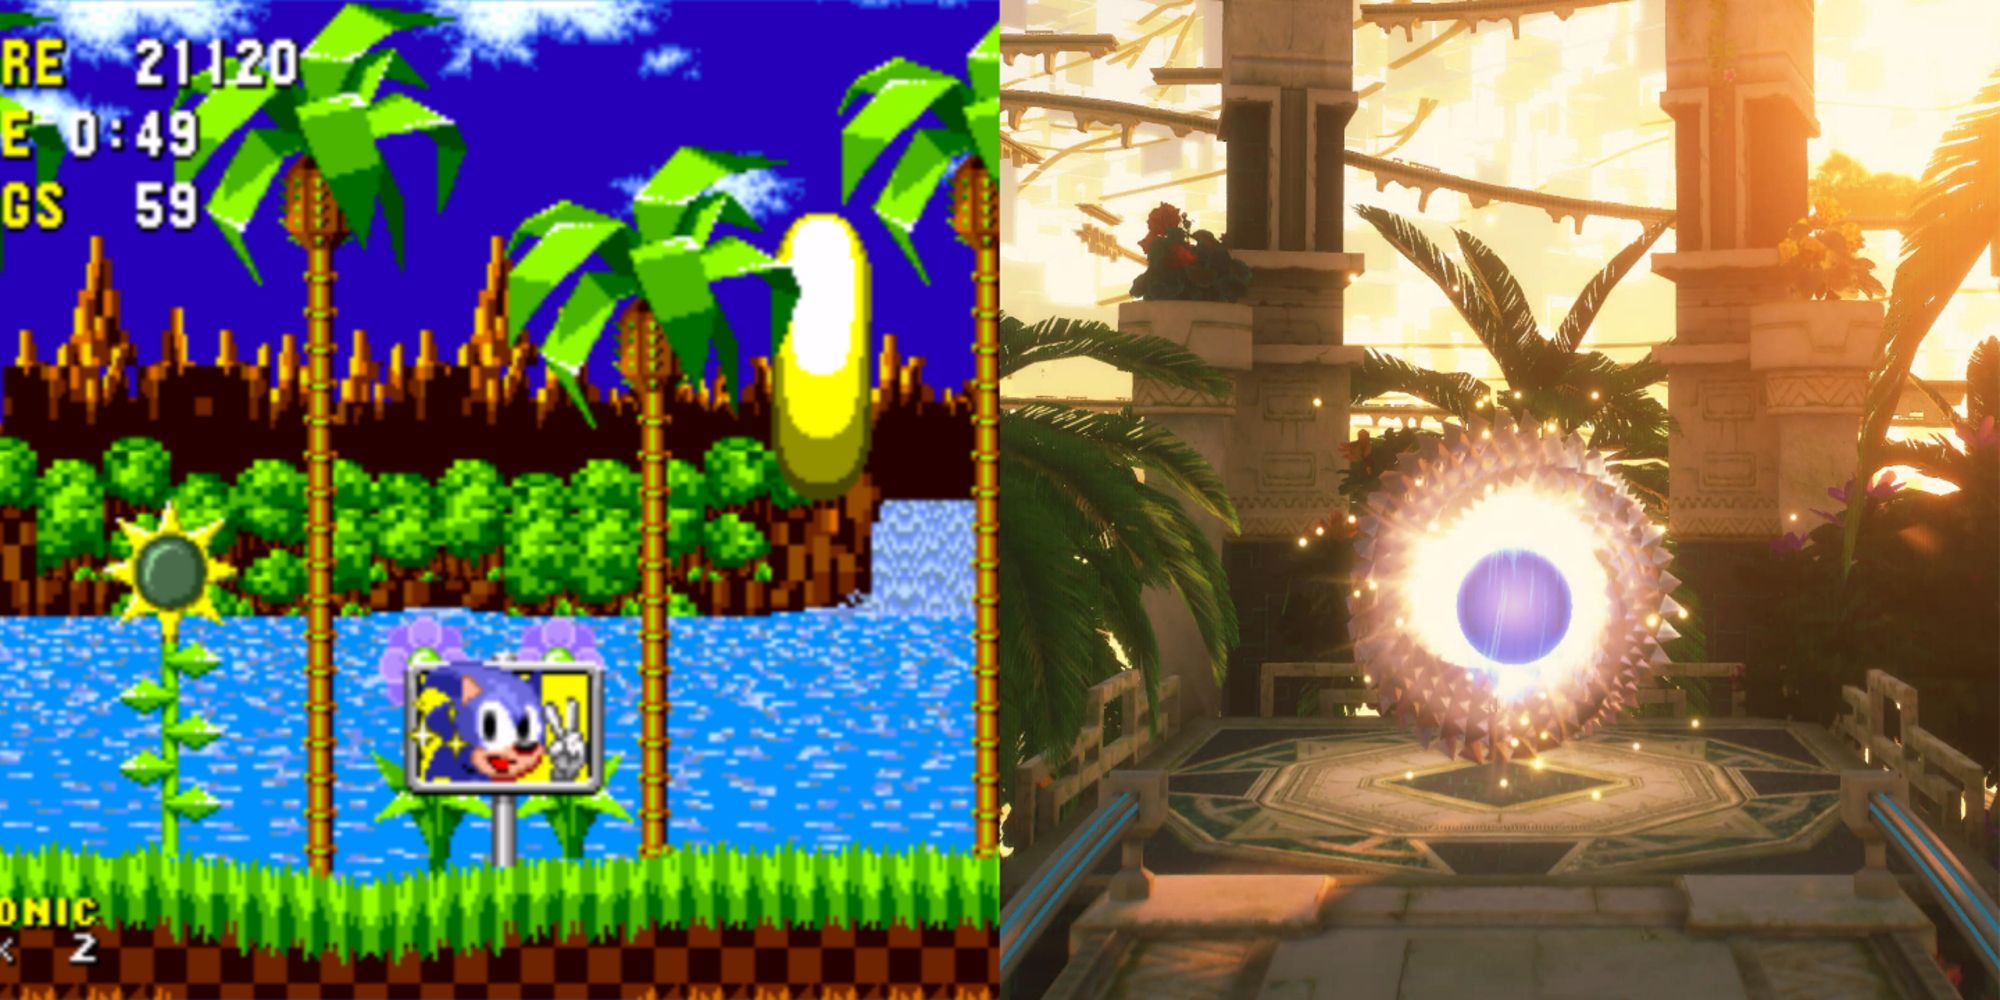 A sign post from Sonic the Hedgehog 2 and a Cyberspace exit portal from Sonic Frontiers, both of which signify the end of a stage in the series.